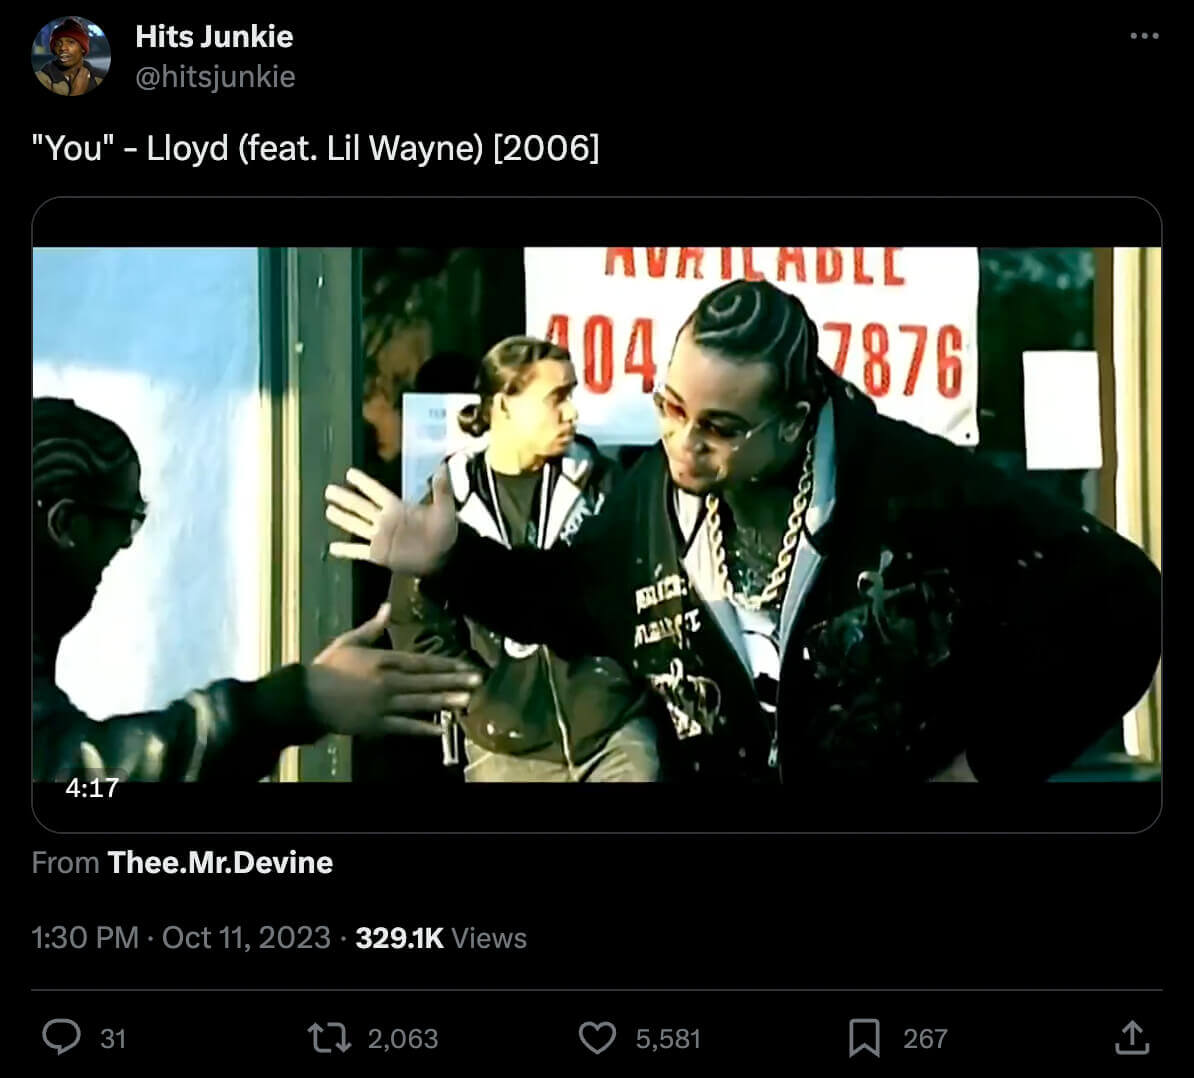 Post of the &quot;You&quot; music video feat Lil Wayne